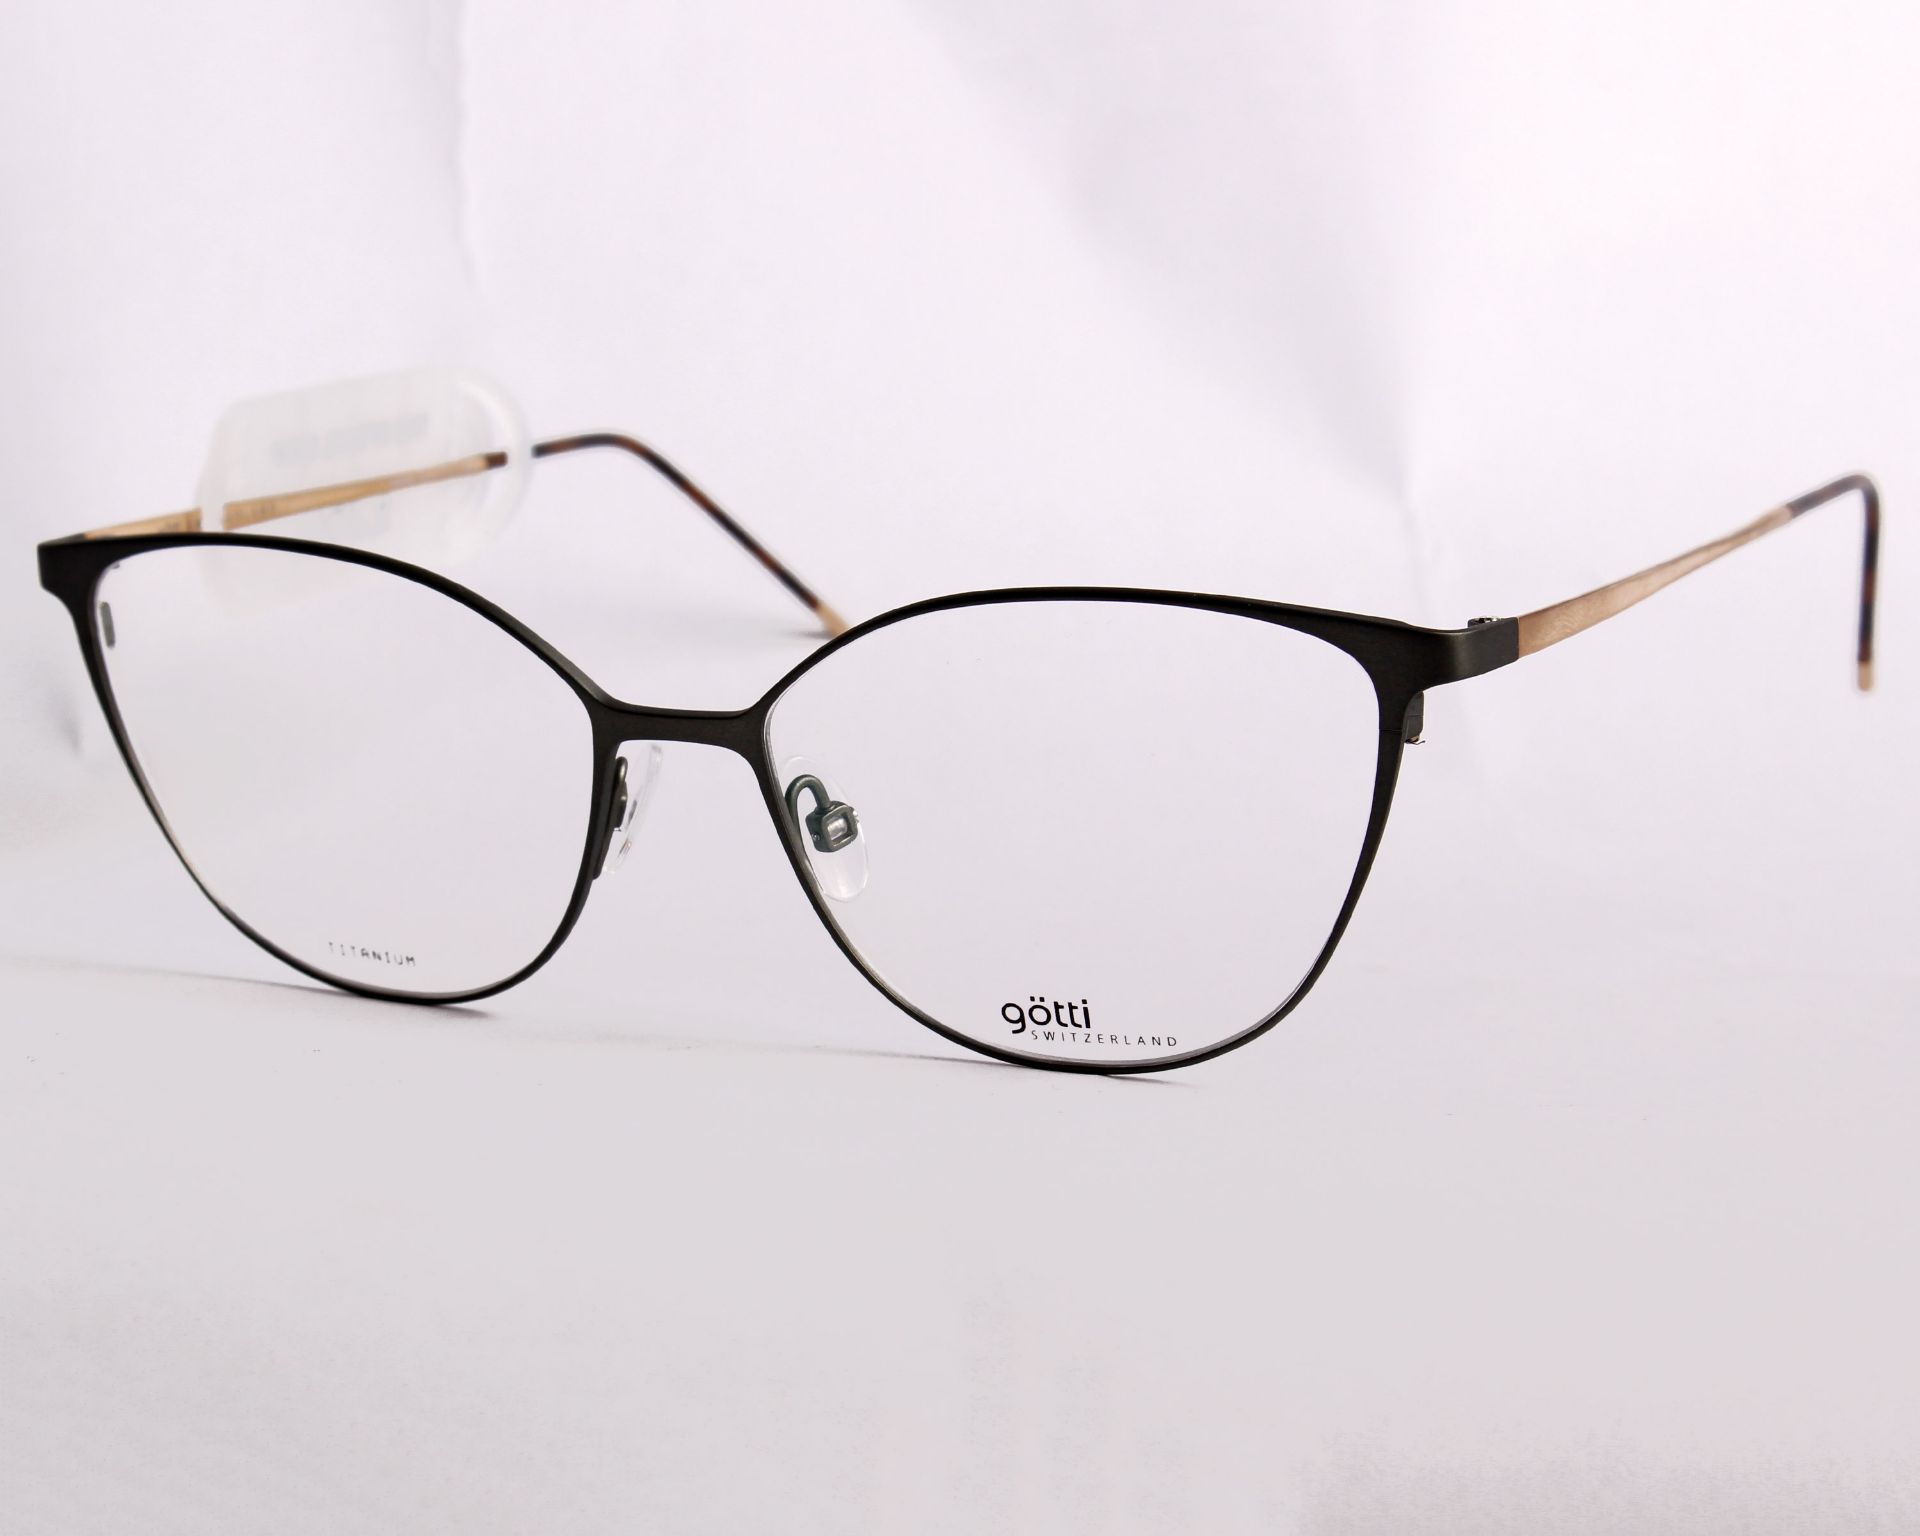 A pair of as new Gotti glasses frames with clear glass (RRP £350). - Image 3 of 3